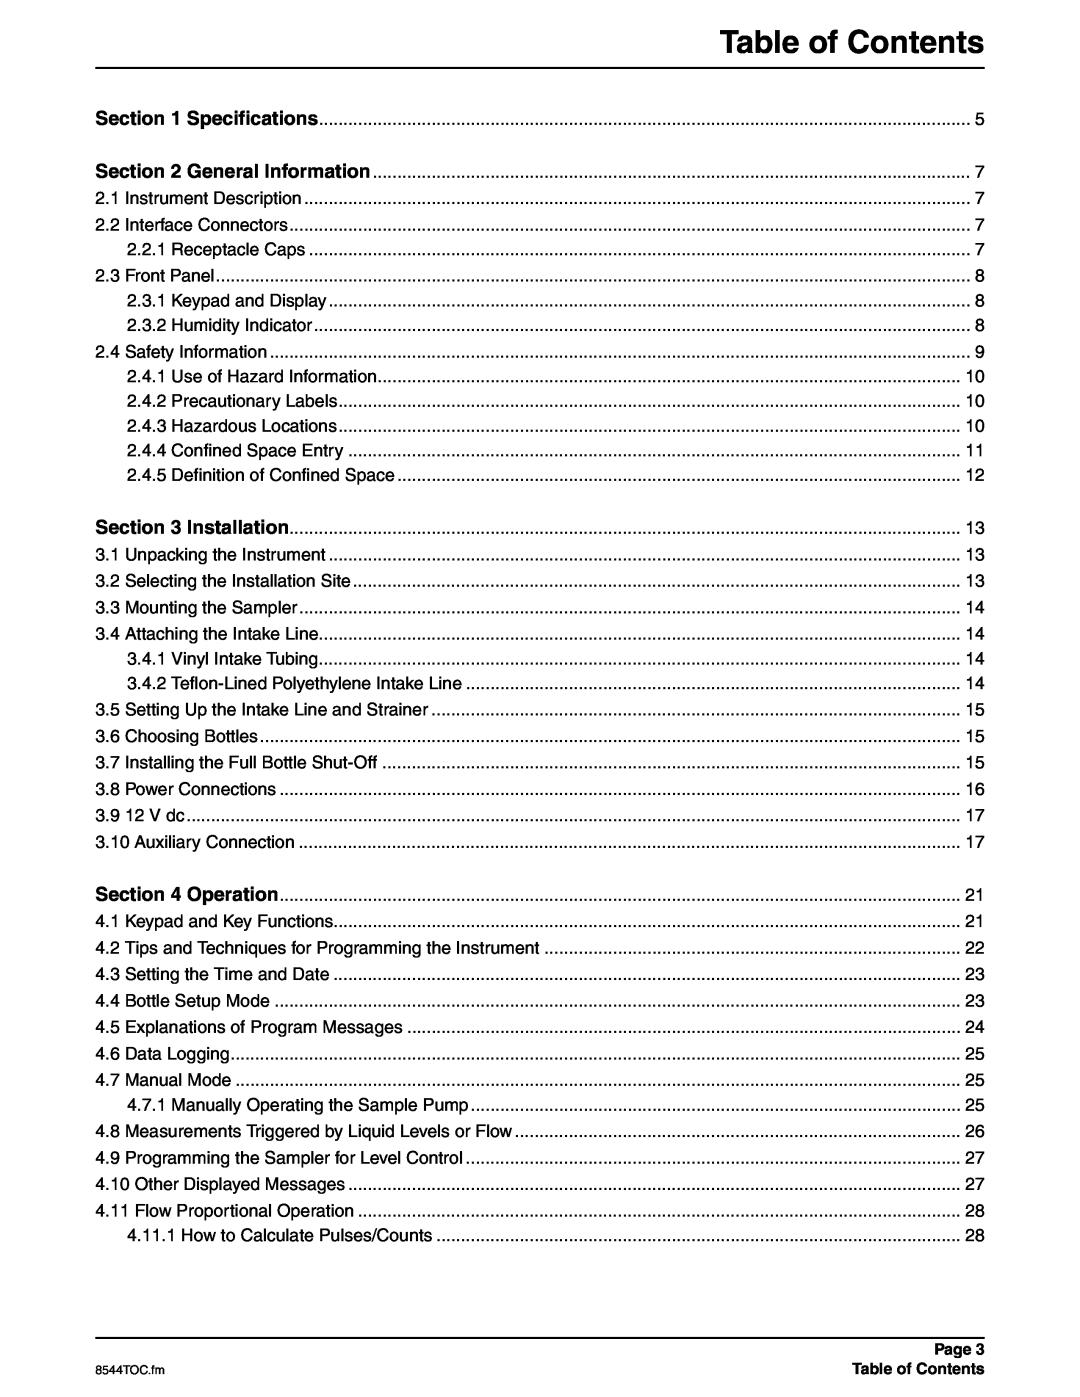 Hach 900 manual Table of Contents, Page 